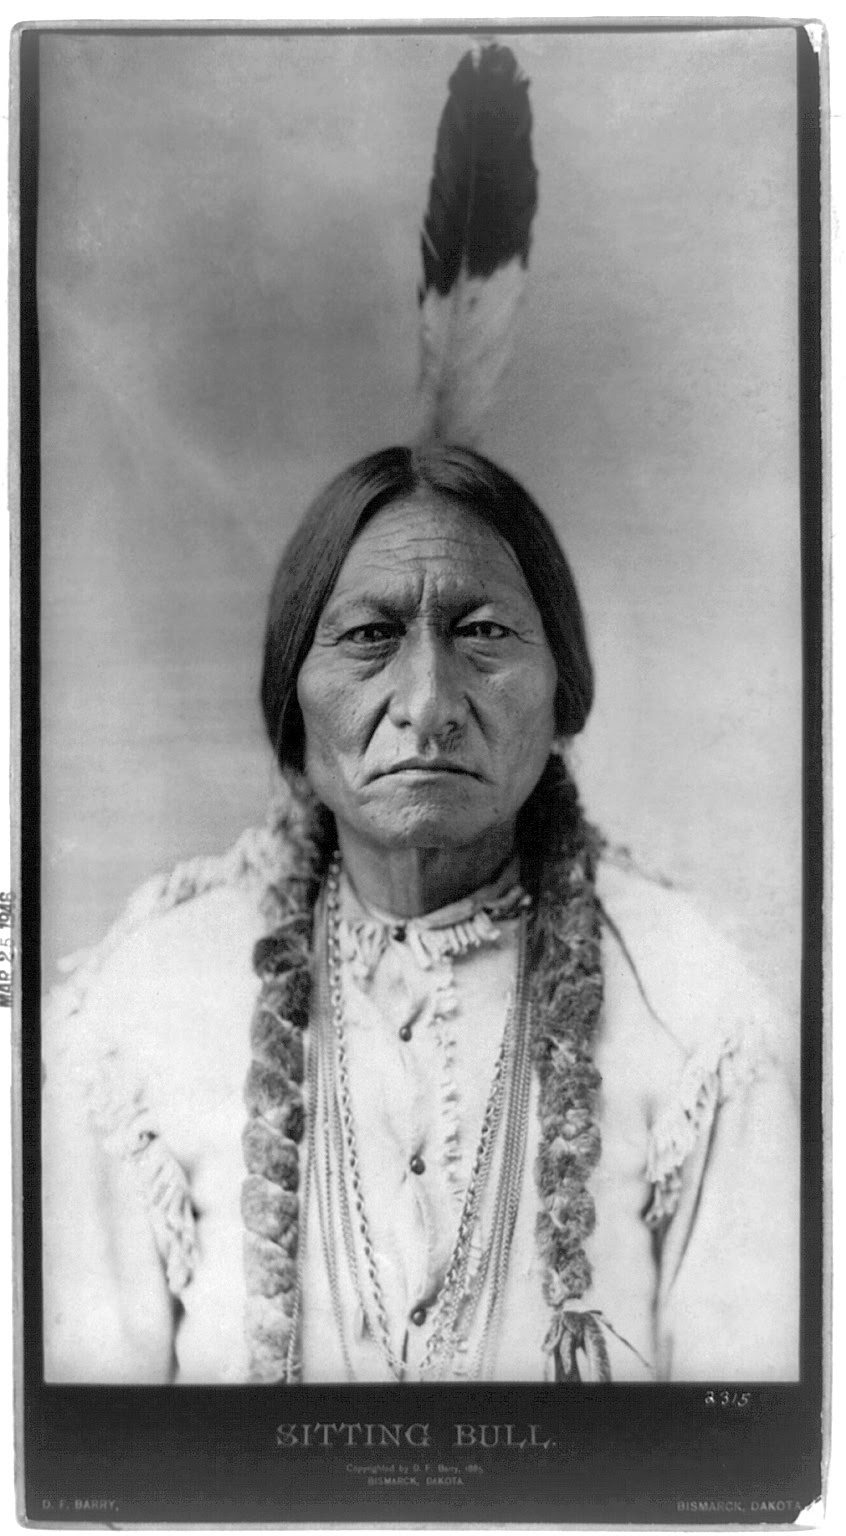 Sitting Bull in 1885 by D.F. Barry